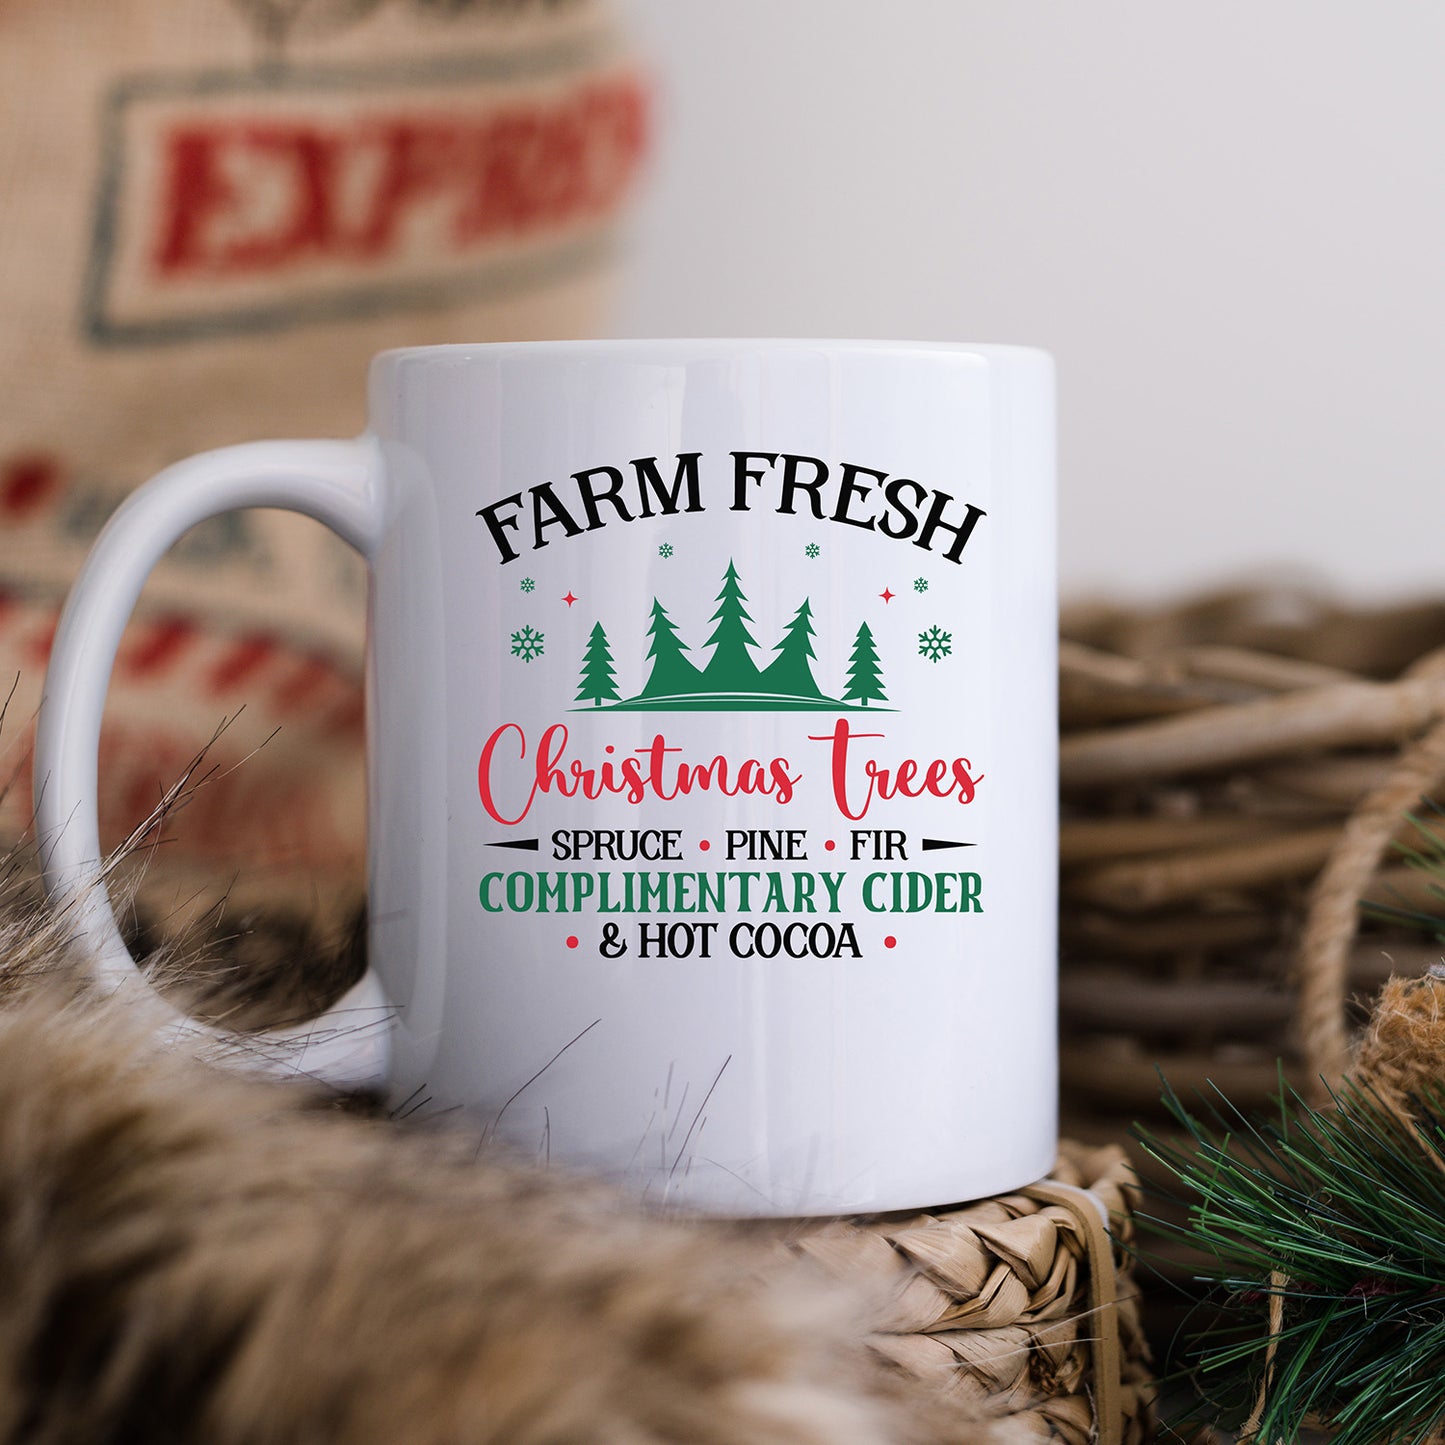 "Farm Fresh Christmas Trees Spruce Pine Fir Complimentary Cider & Hot Cocoa" Graphic